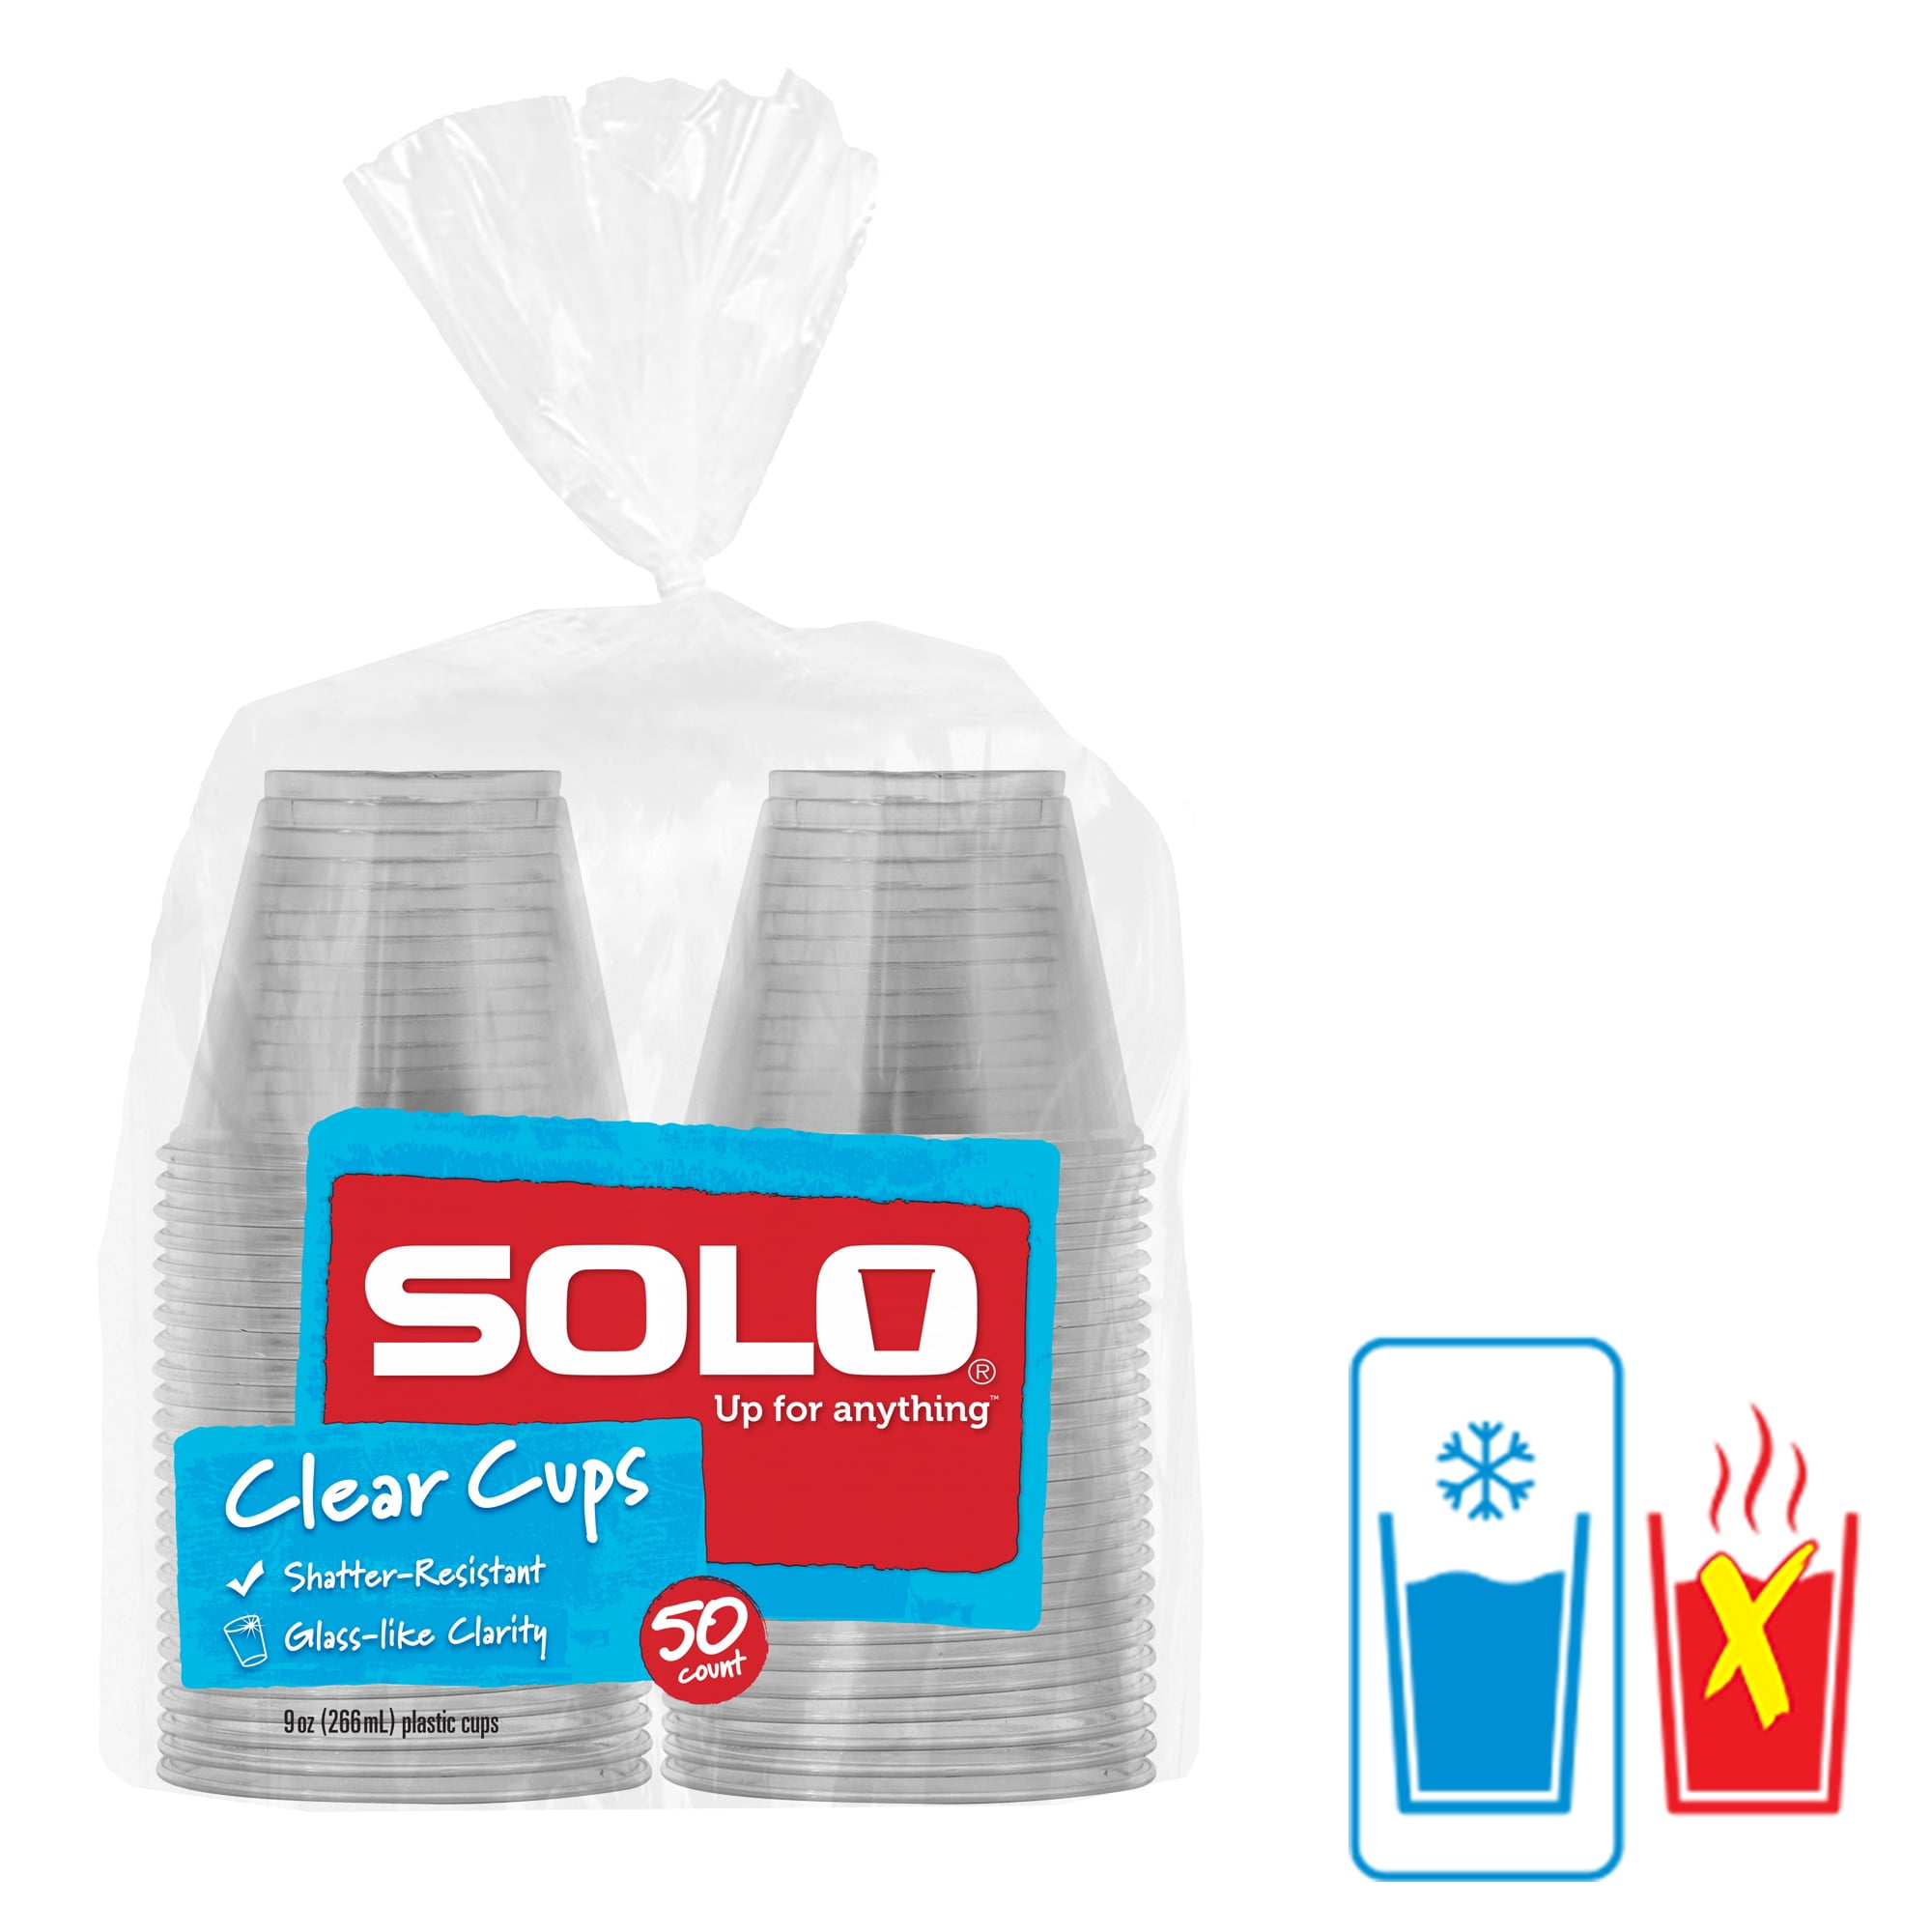 Solo Tall Shaped Plastic Party Cold Drink Cups 9 Oz Clear 50 Cups Per  Sleeve Case Of 20 Sleeves - Office Depot